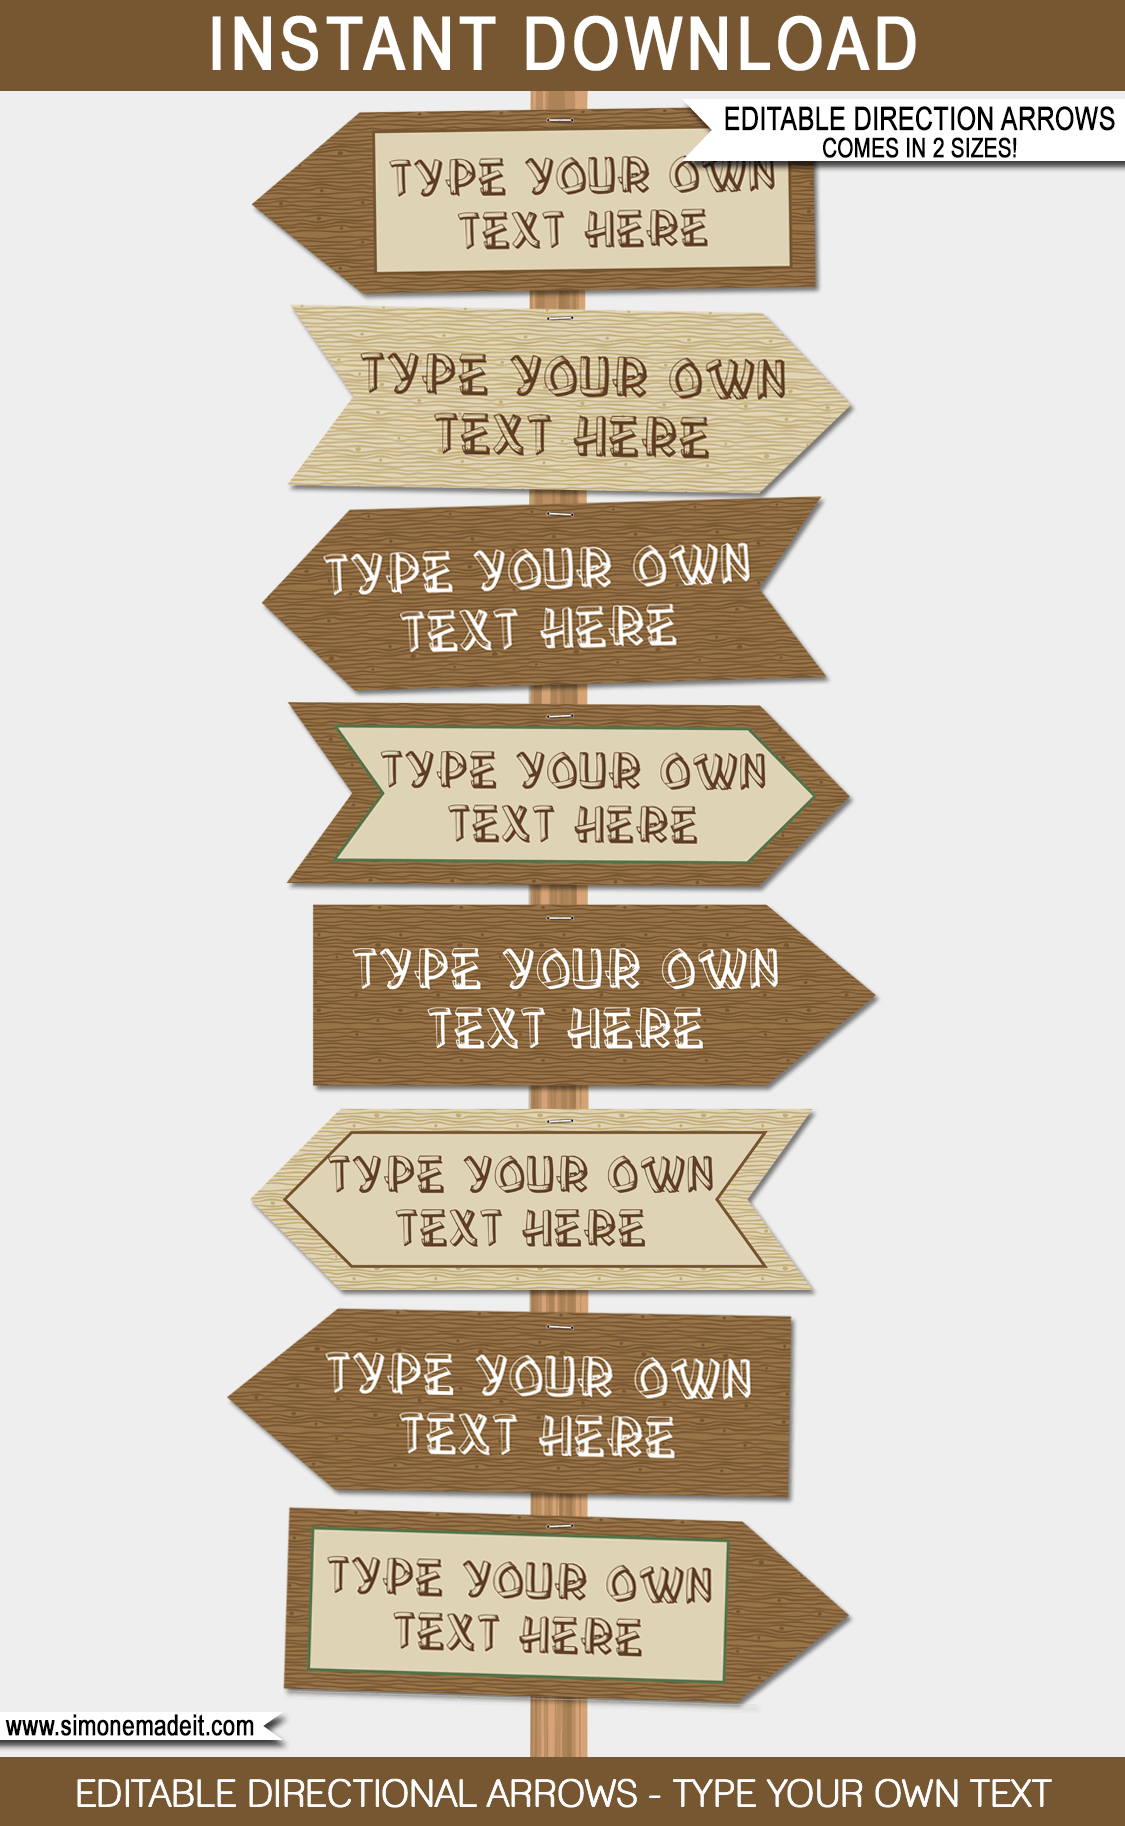 Camping Party Directional Signs | Direction Arrows | DIY Editable Template | Camping Birthday Party | INSTANT DOWNLOAD via simonemadeit.com